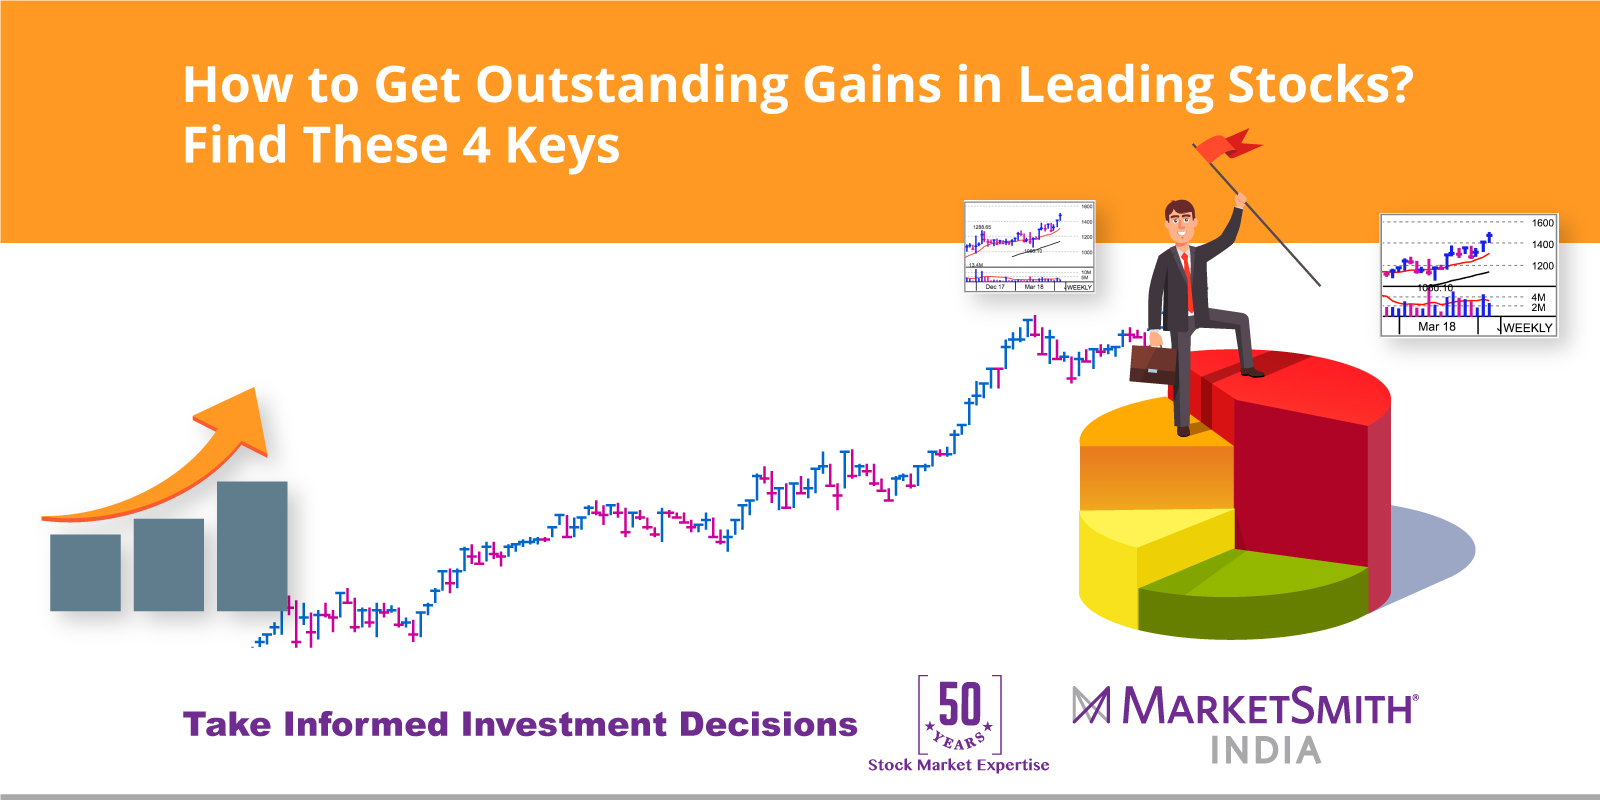 How to Get Outstanding Gains in Leading Stocks? Find These 4 Keys